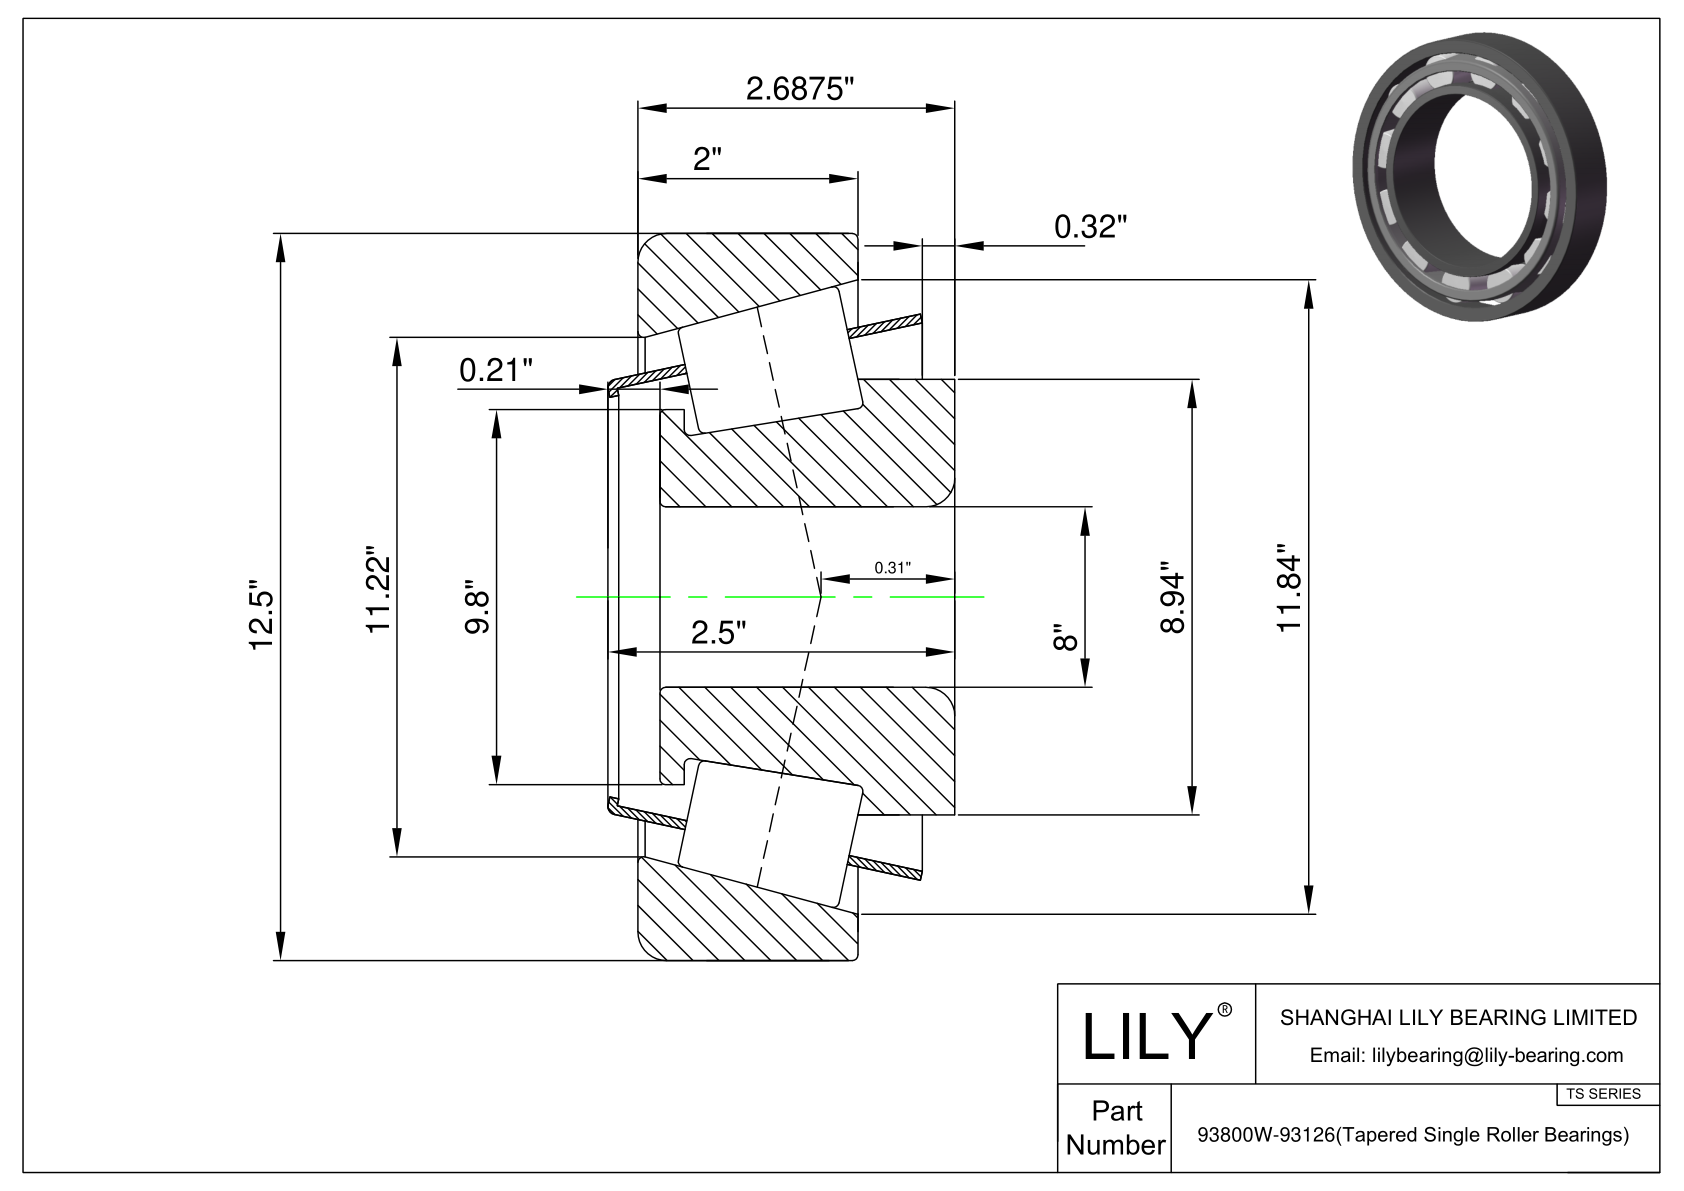 93800W-93126 TS (Tapered Single Roller Bearings) (Imperial) cad drawing